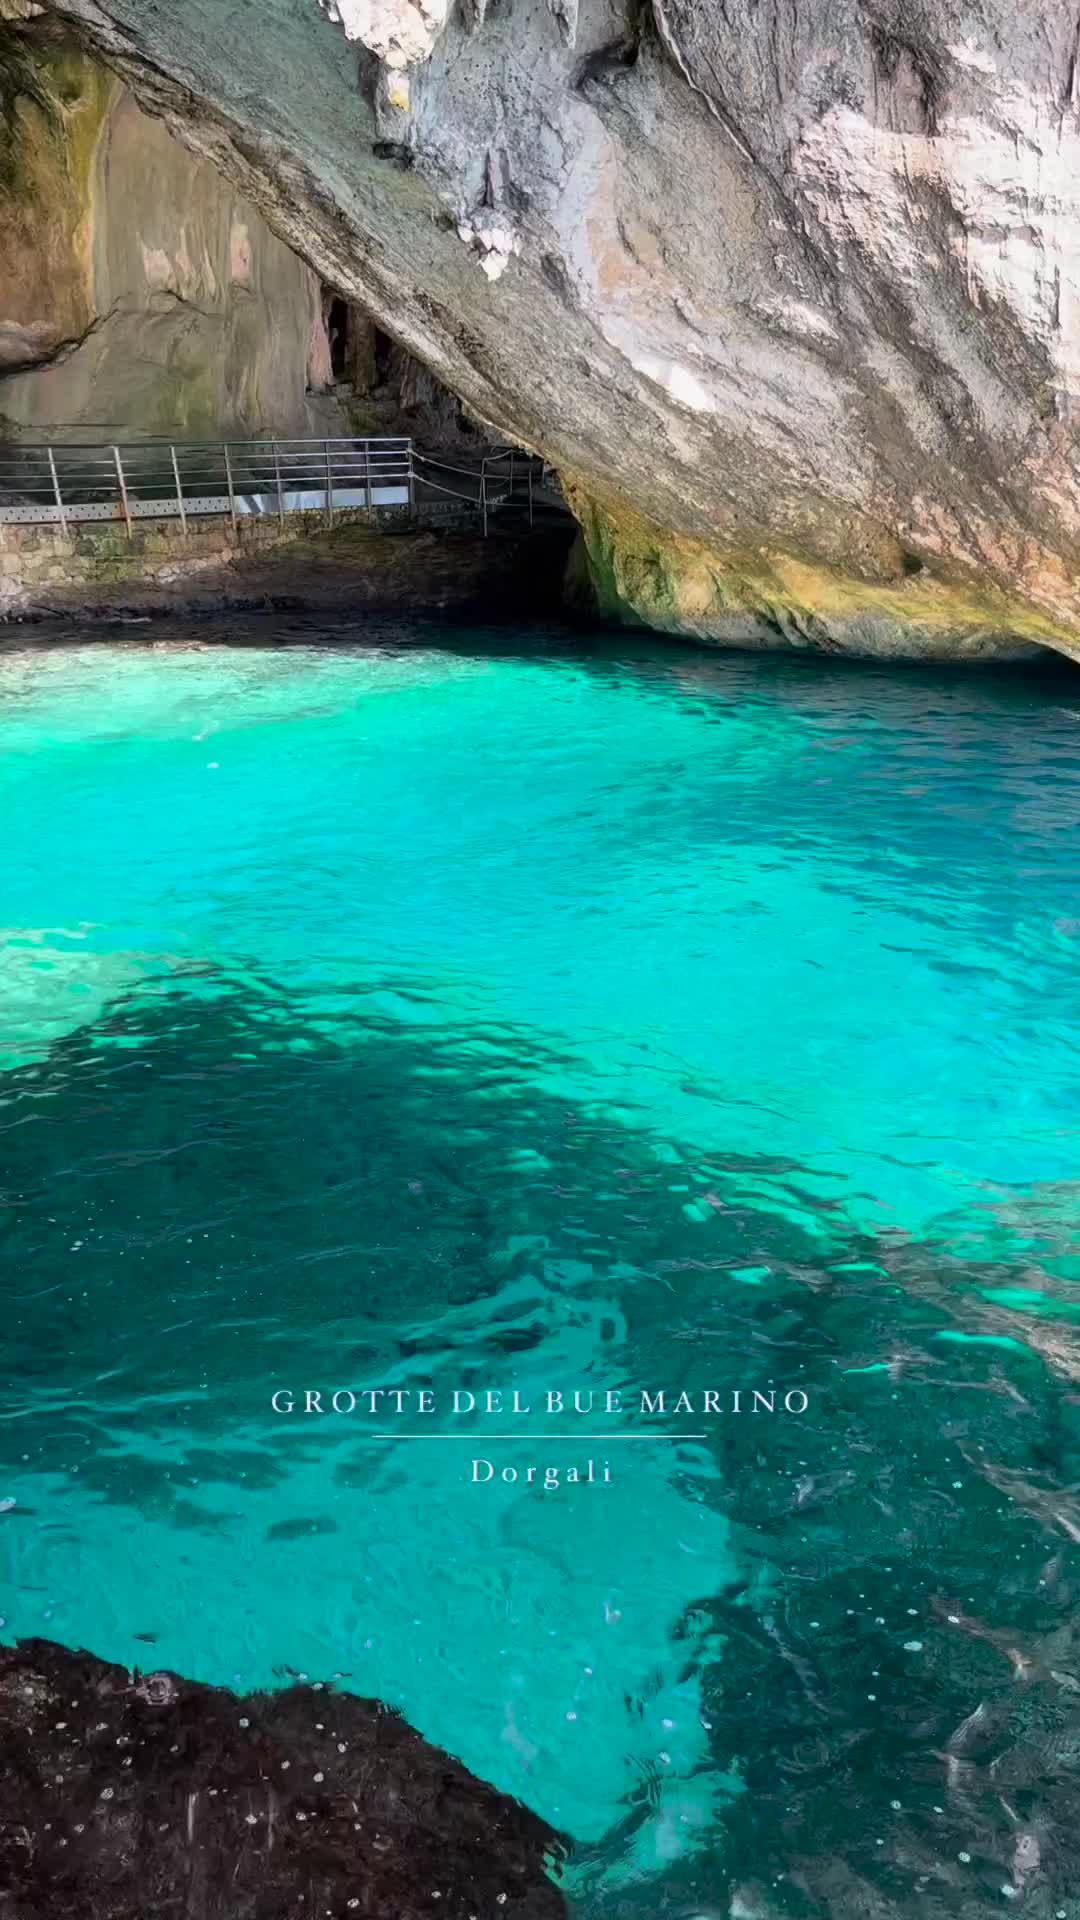 Exploring Grotte del Bue Marino by SUP in Cala Gonone